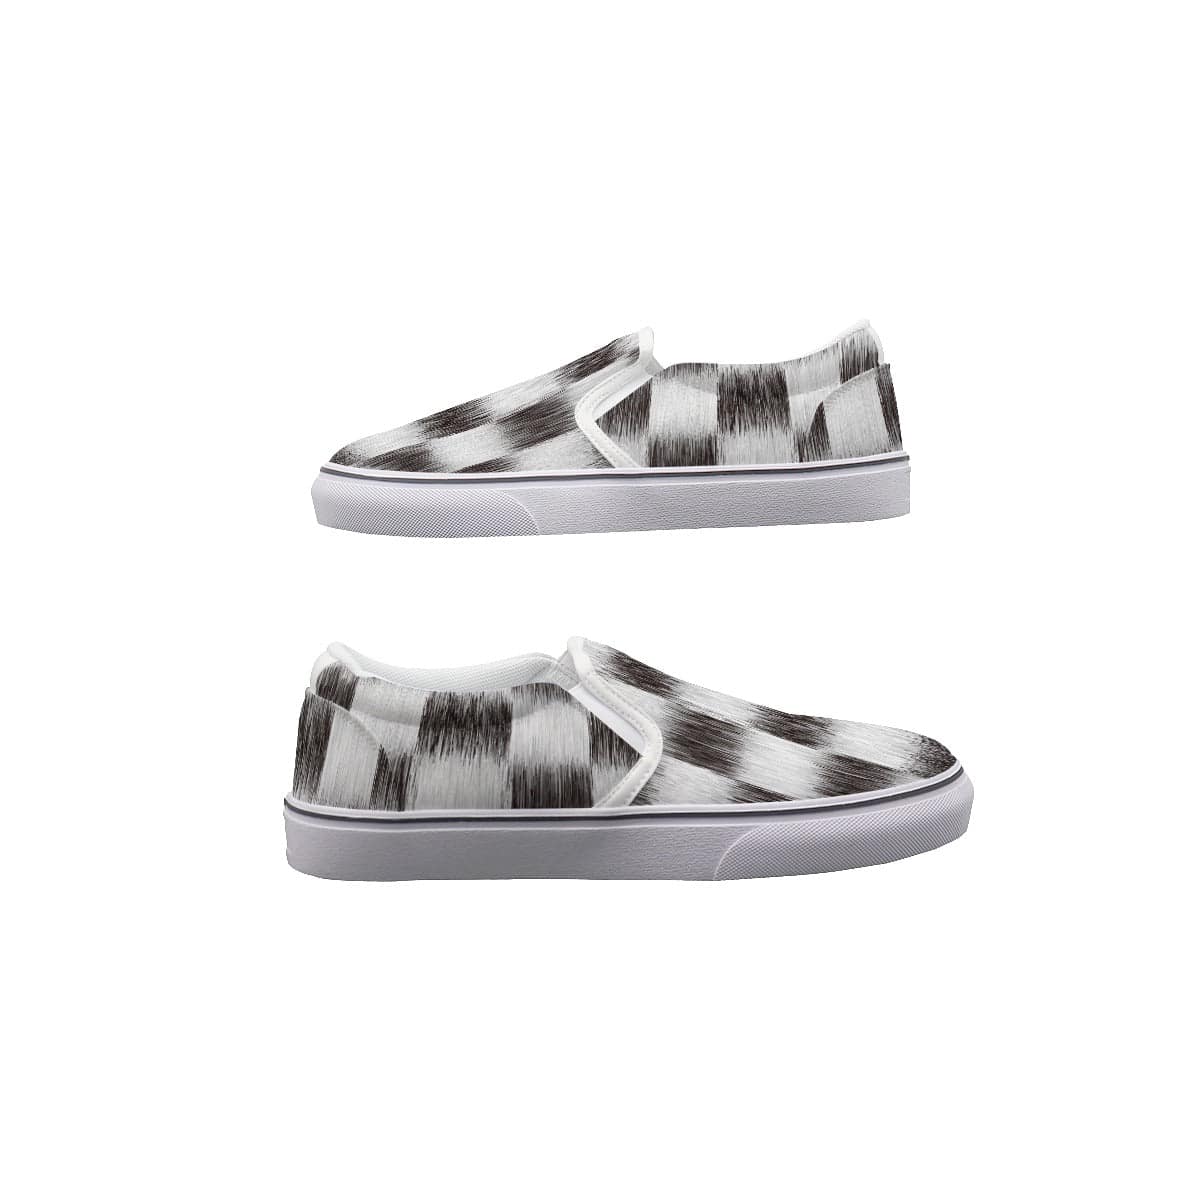 Yoycol Checkered Hue Hoppers - Women's Slip On Sneakers